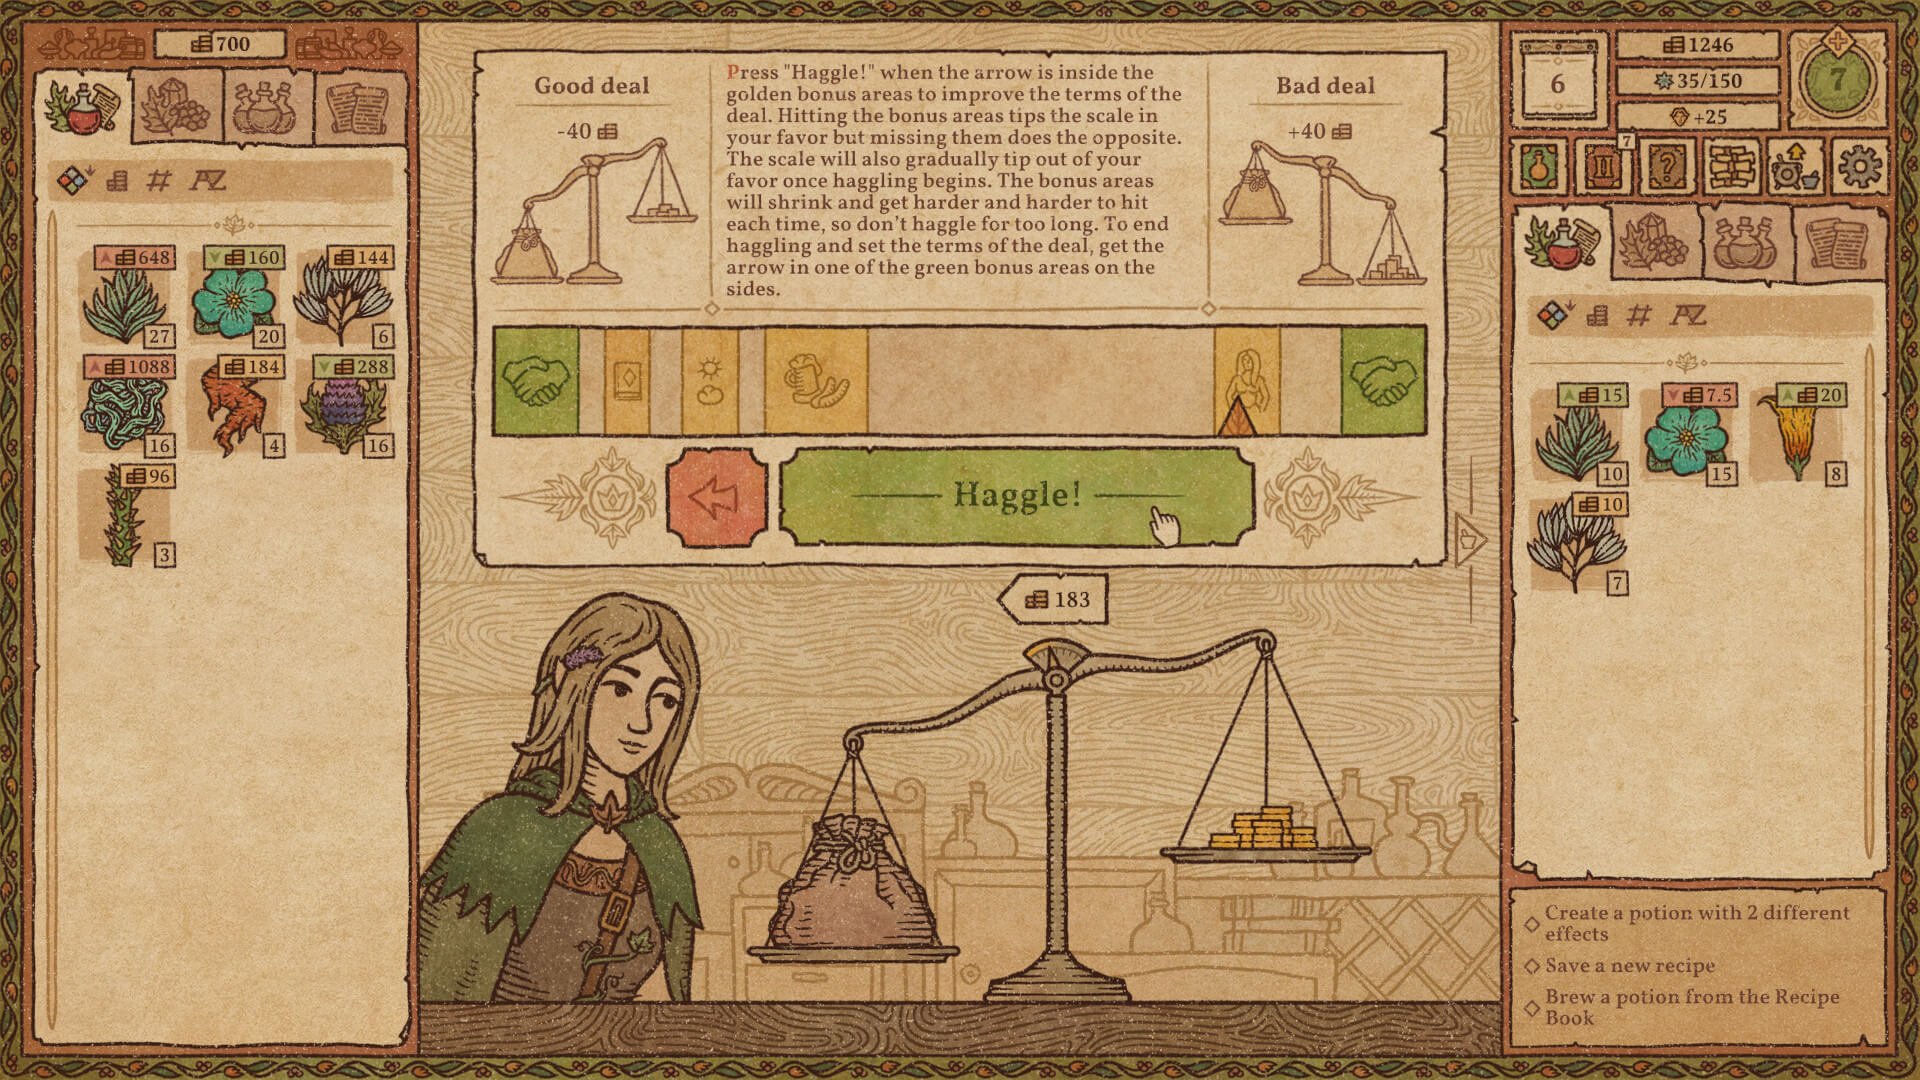 A haggling tutorial in Potion Craft